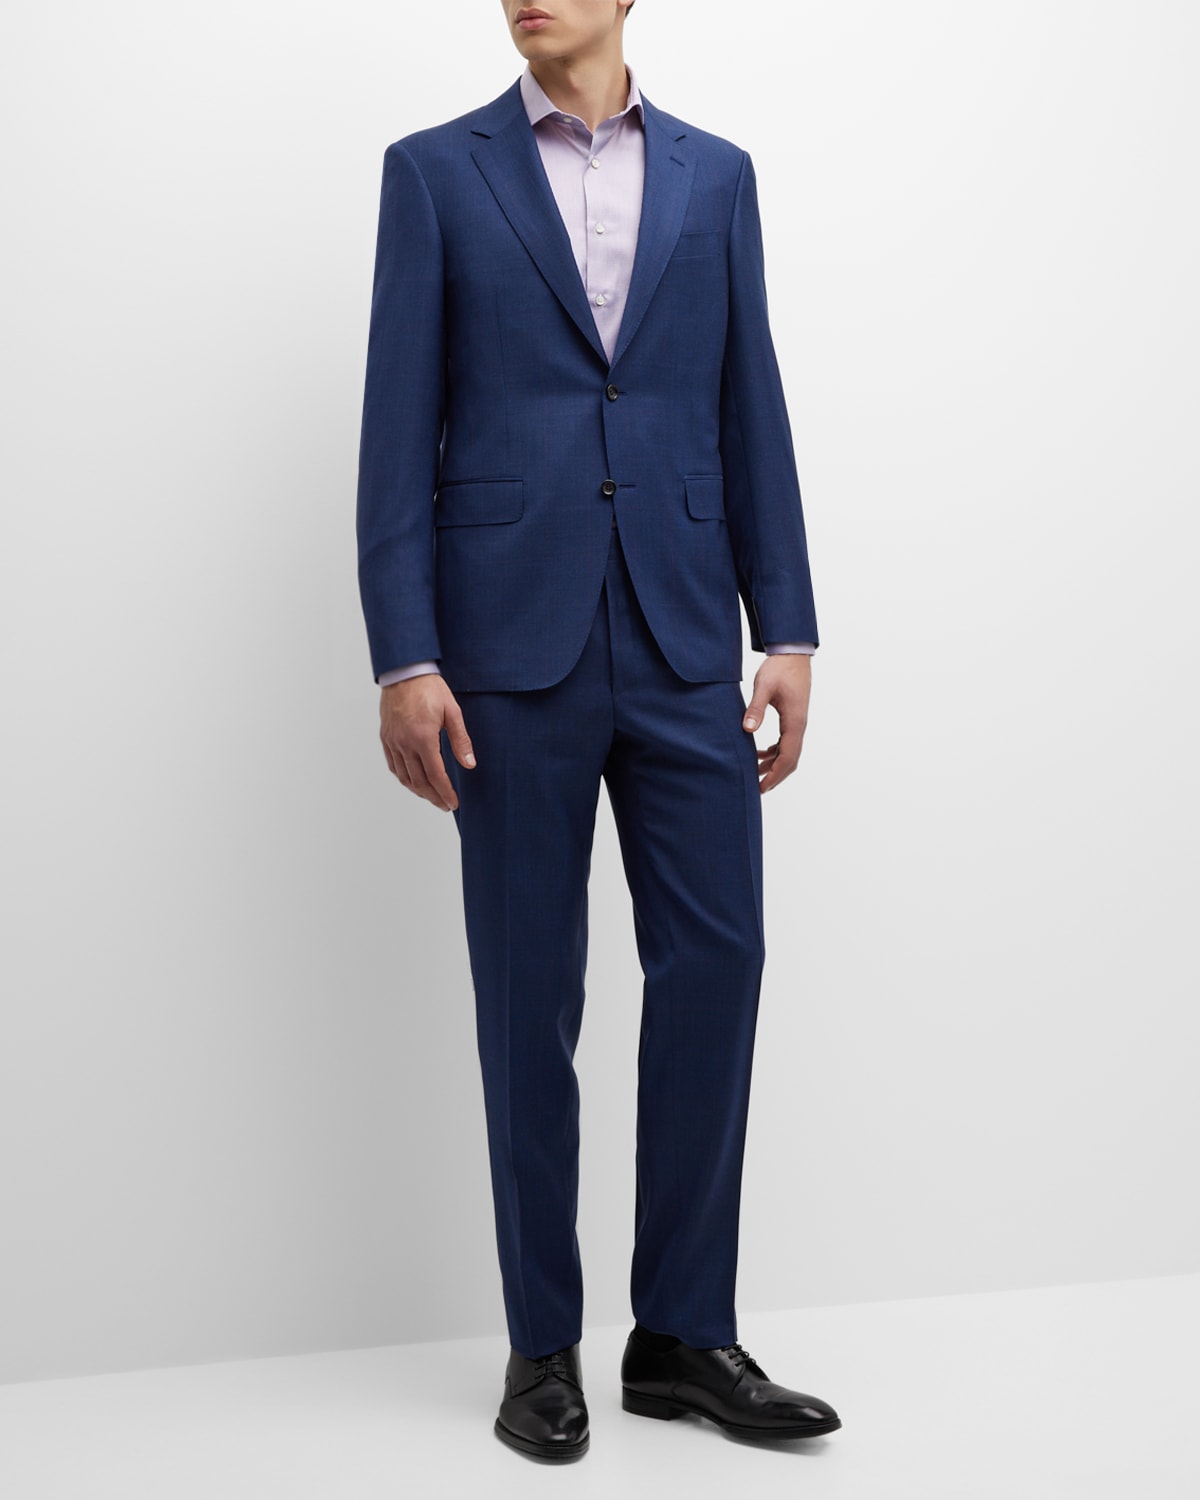 Canali Men's Plaid Wool Suit In Navy